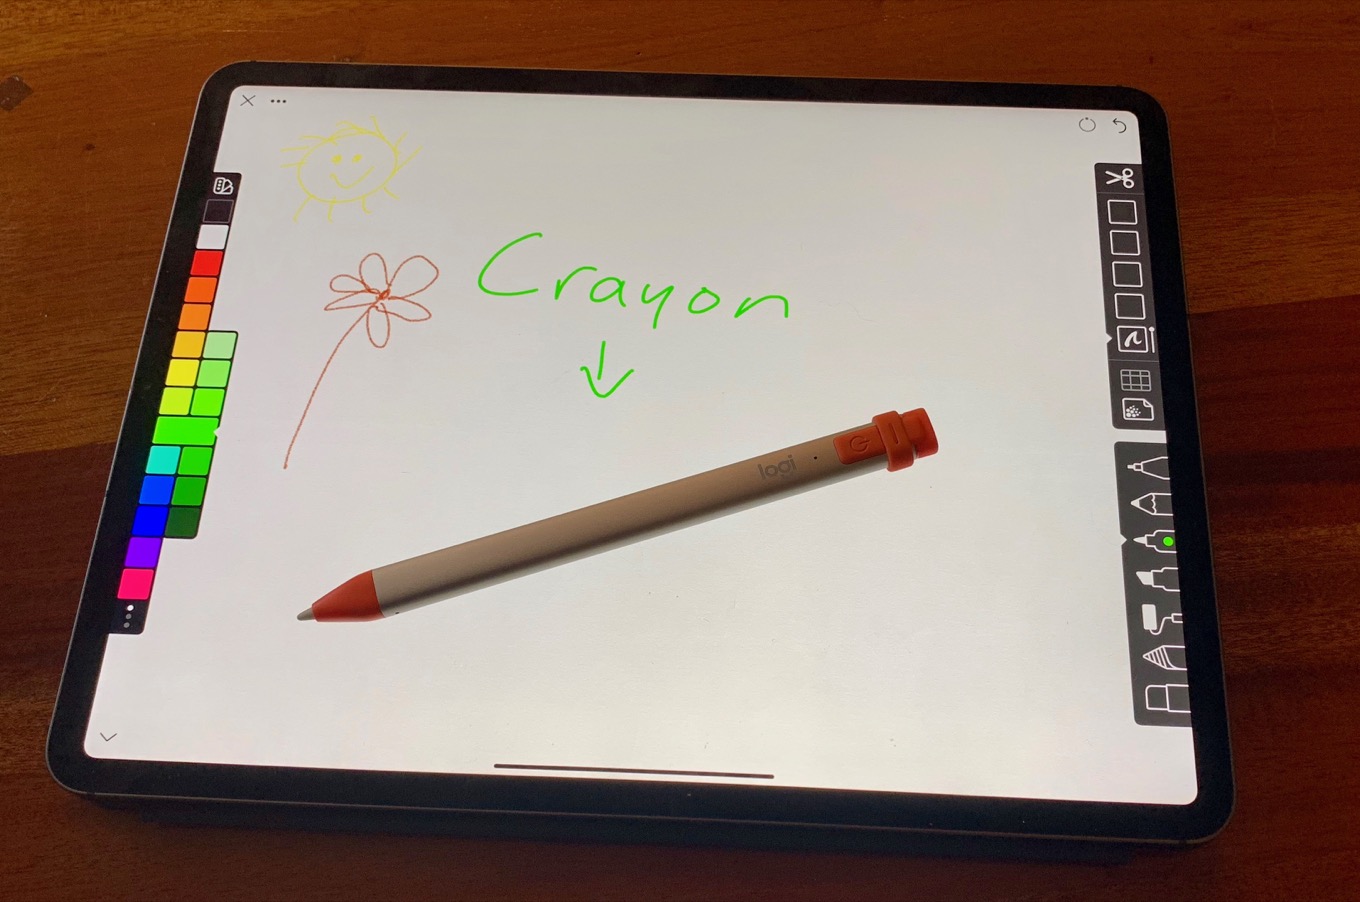 Yes, Crayon works iPad Pro – Colors